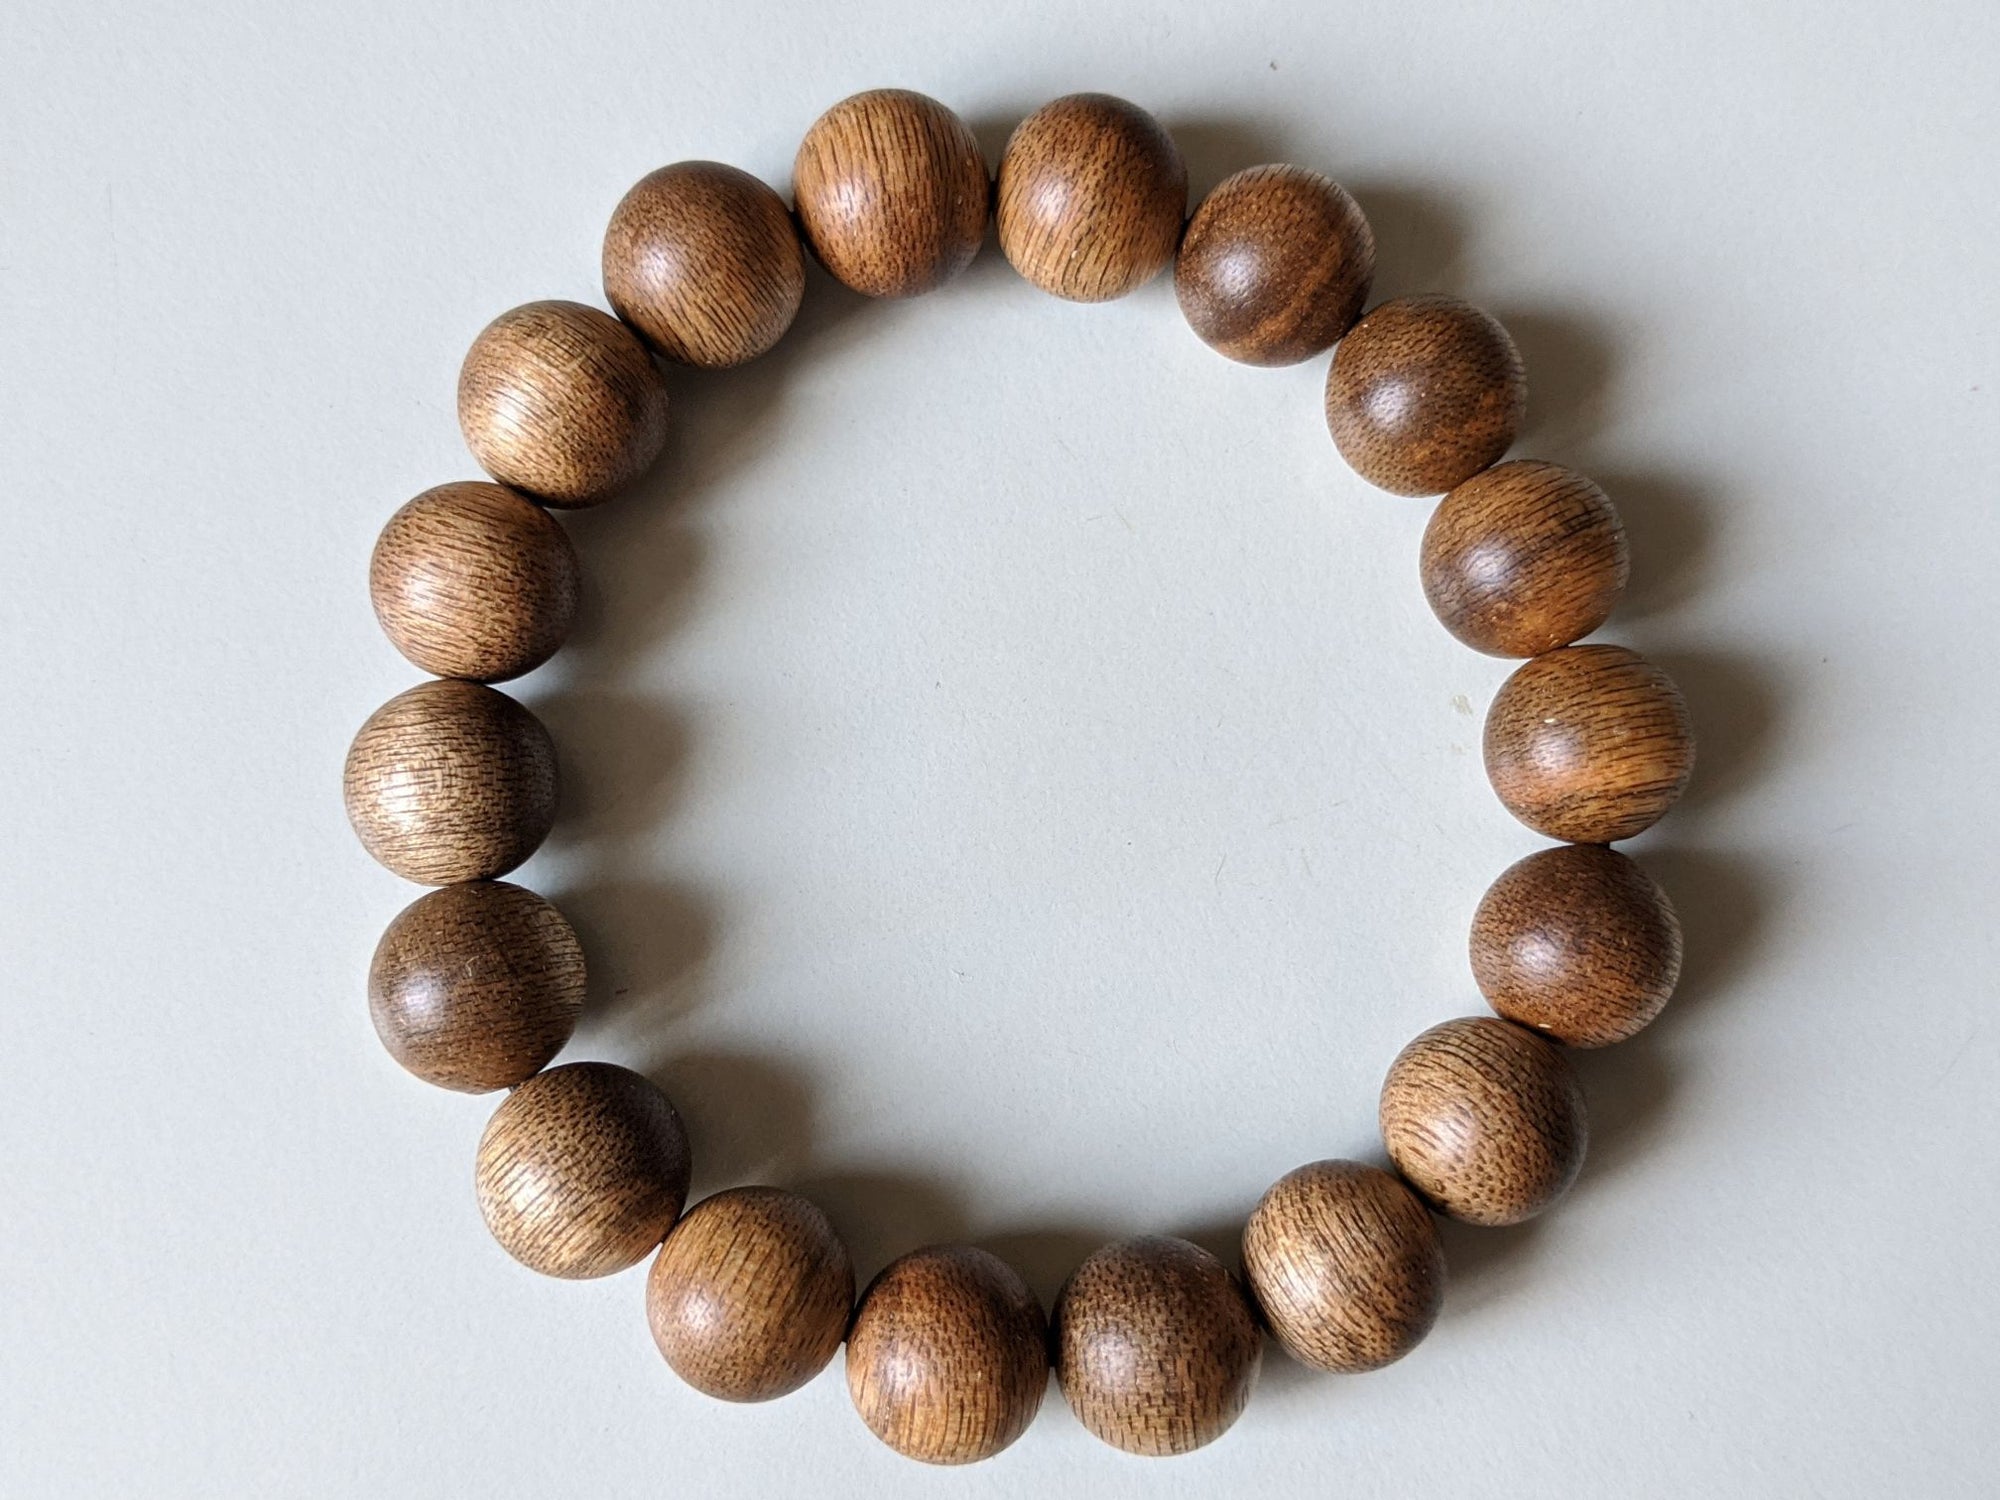 The GGG, Premium Cultivated Agarwood 108 Mala and/or Bracelet - Cultivated beads with wild agarwood quality - 12mm Agarwood Bracelet 18 beads 7g